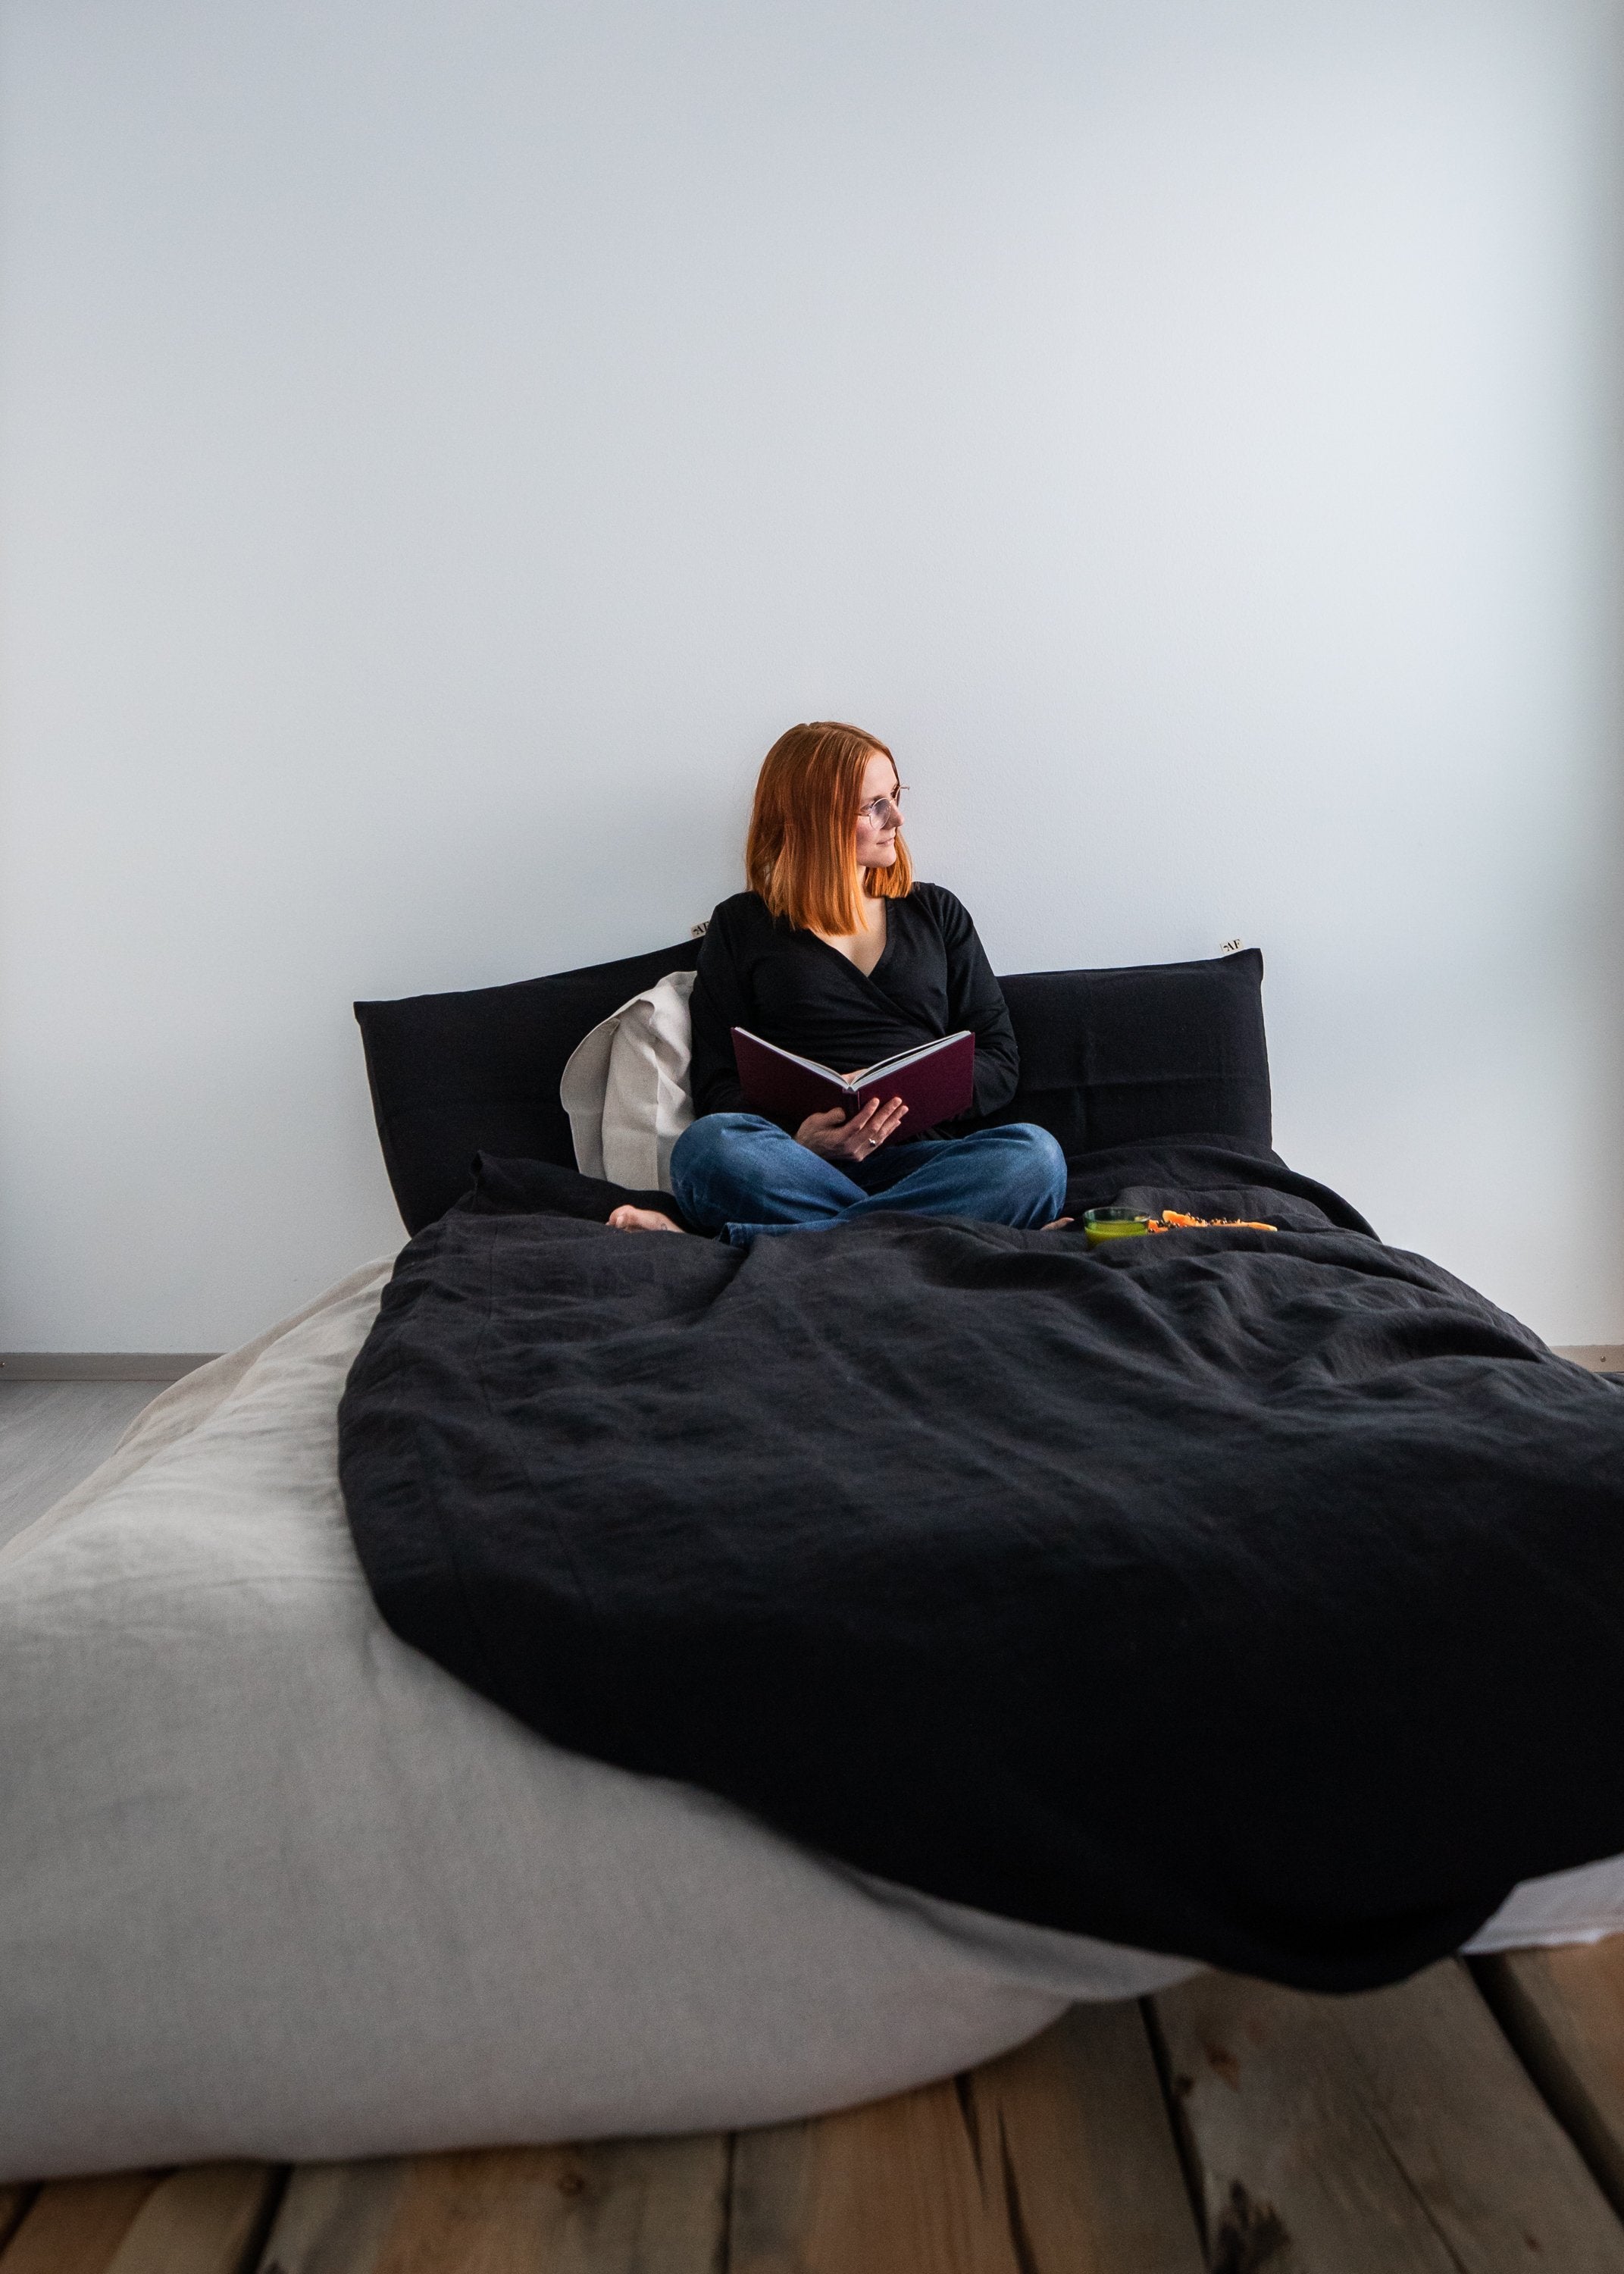 Hempbedlinens are comfortable and breathable material to sleep in. Arctic Flora hemptextiles are air-finished for a softer feel. Minimal monochrome choices black and beige compliments any beddings on their own.